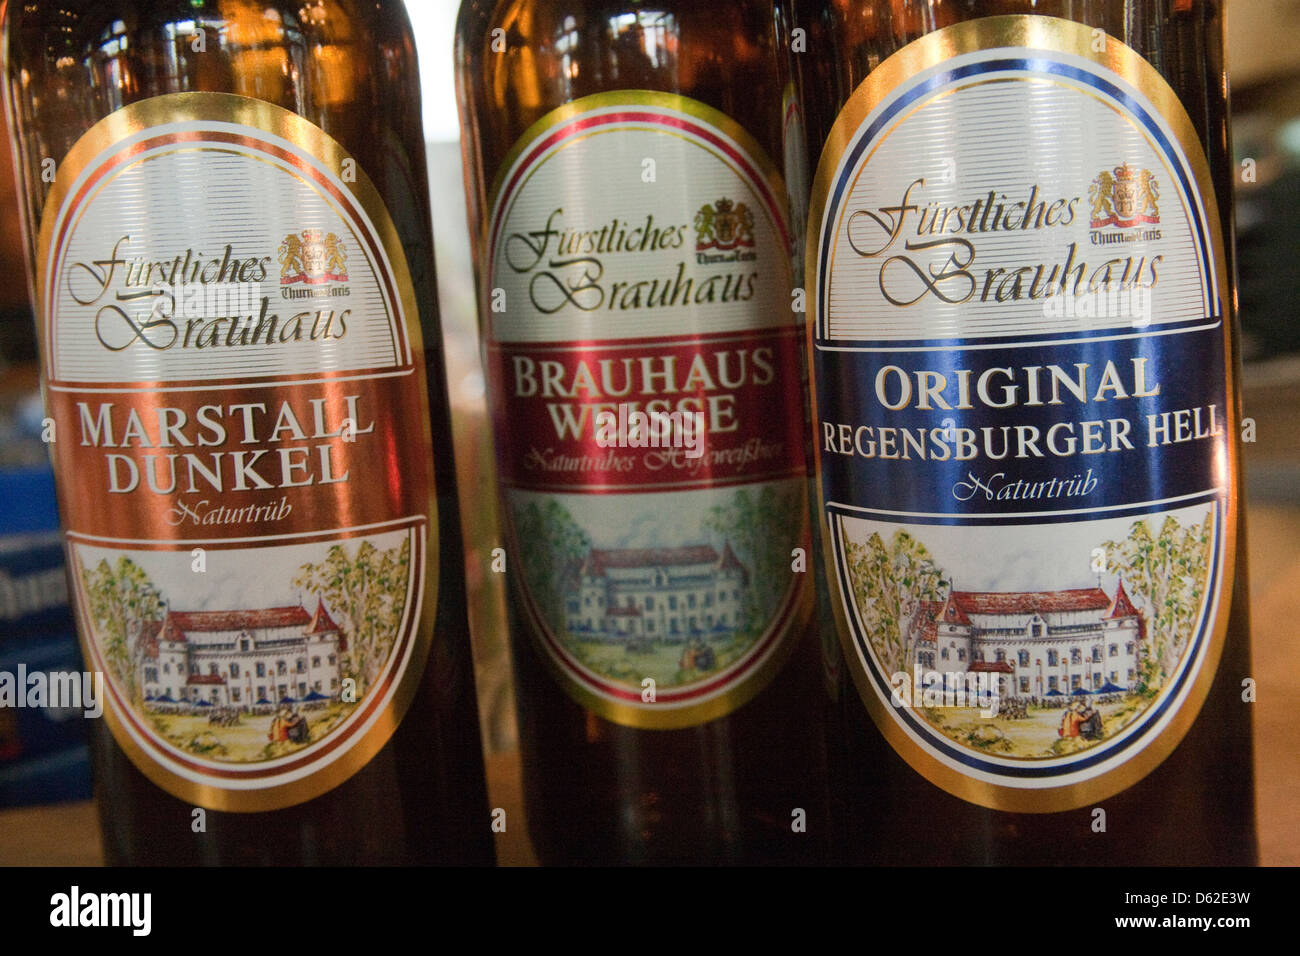 Beers from Furstliches Brewery located in the heart of Old Town Regensburg, Germany, an UNESCO World Heritage Site. Stock Photo